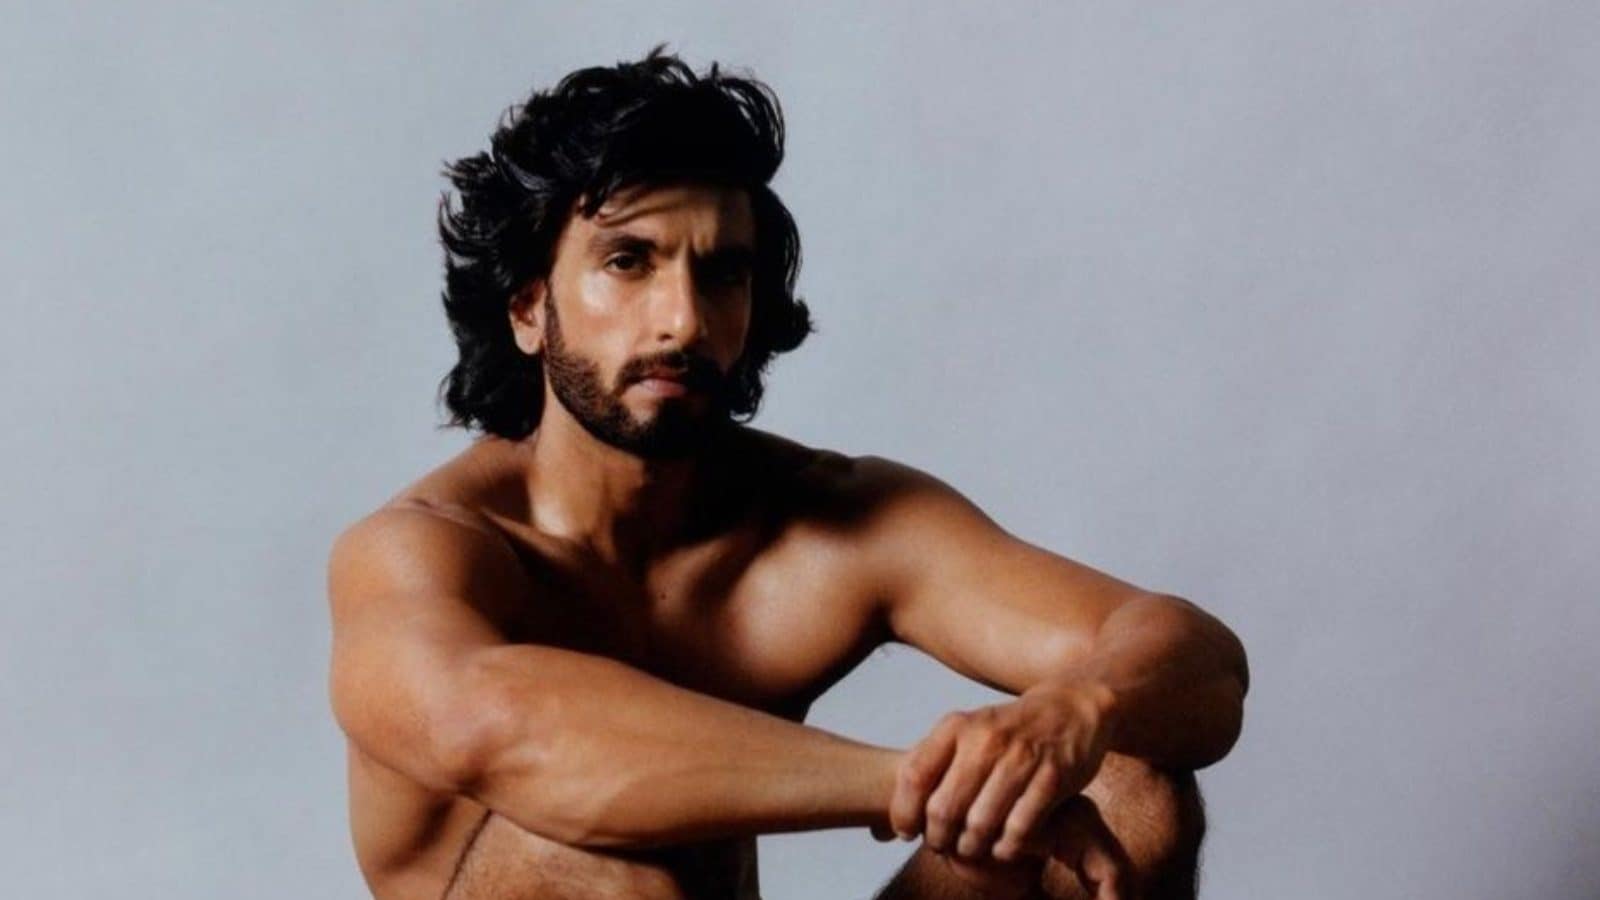 Ranveer Singh in the Buff Has Cheesed Off Some Indians. Has Actor Violated  Law? News18 Explains - News18